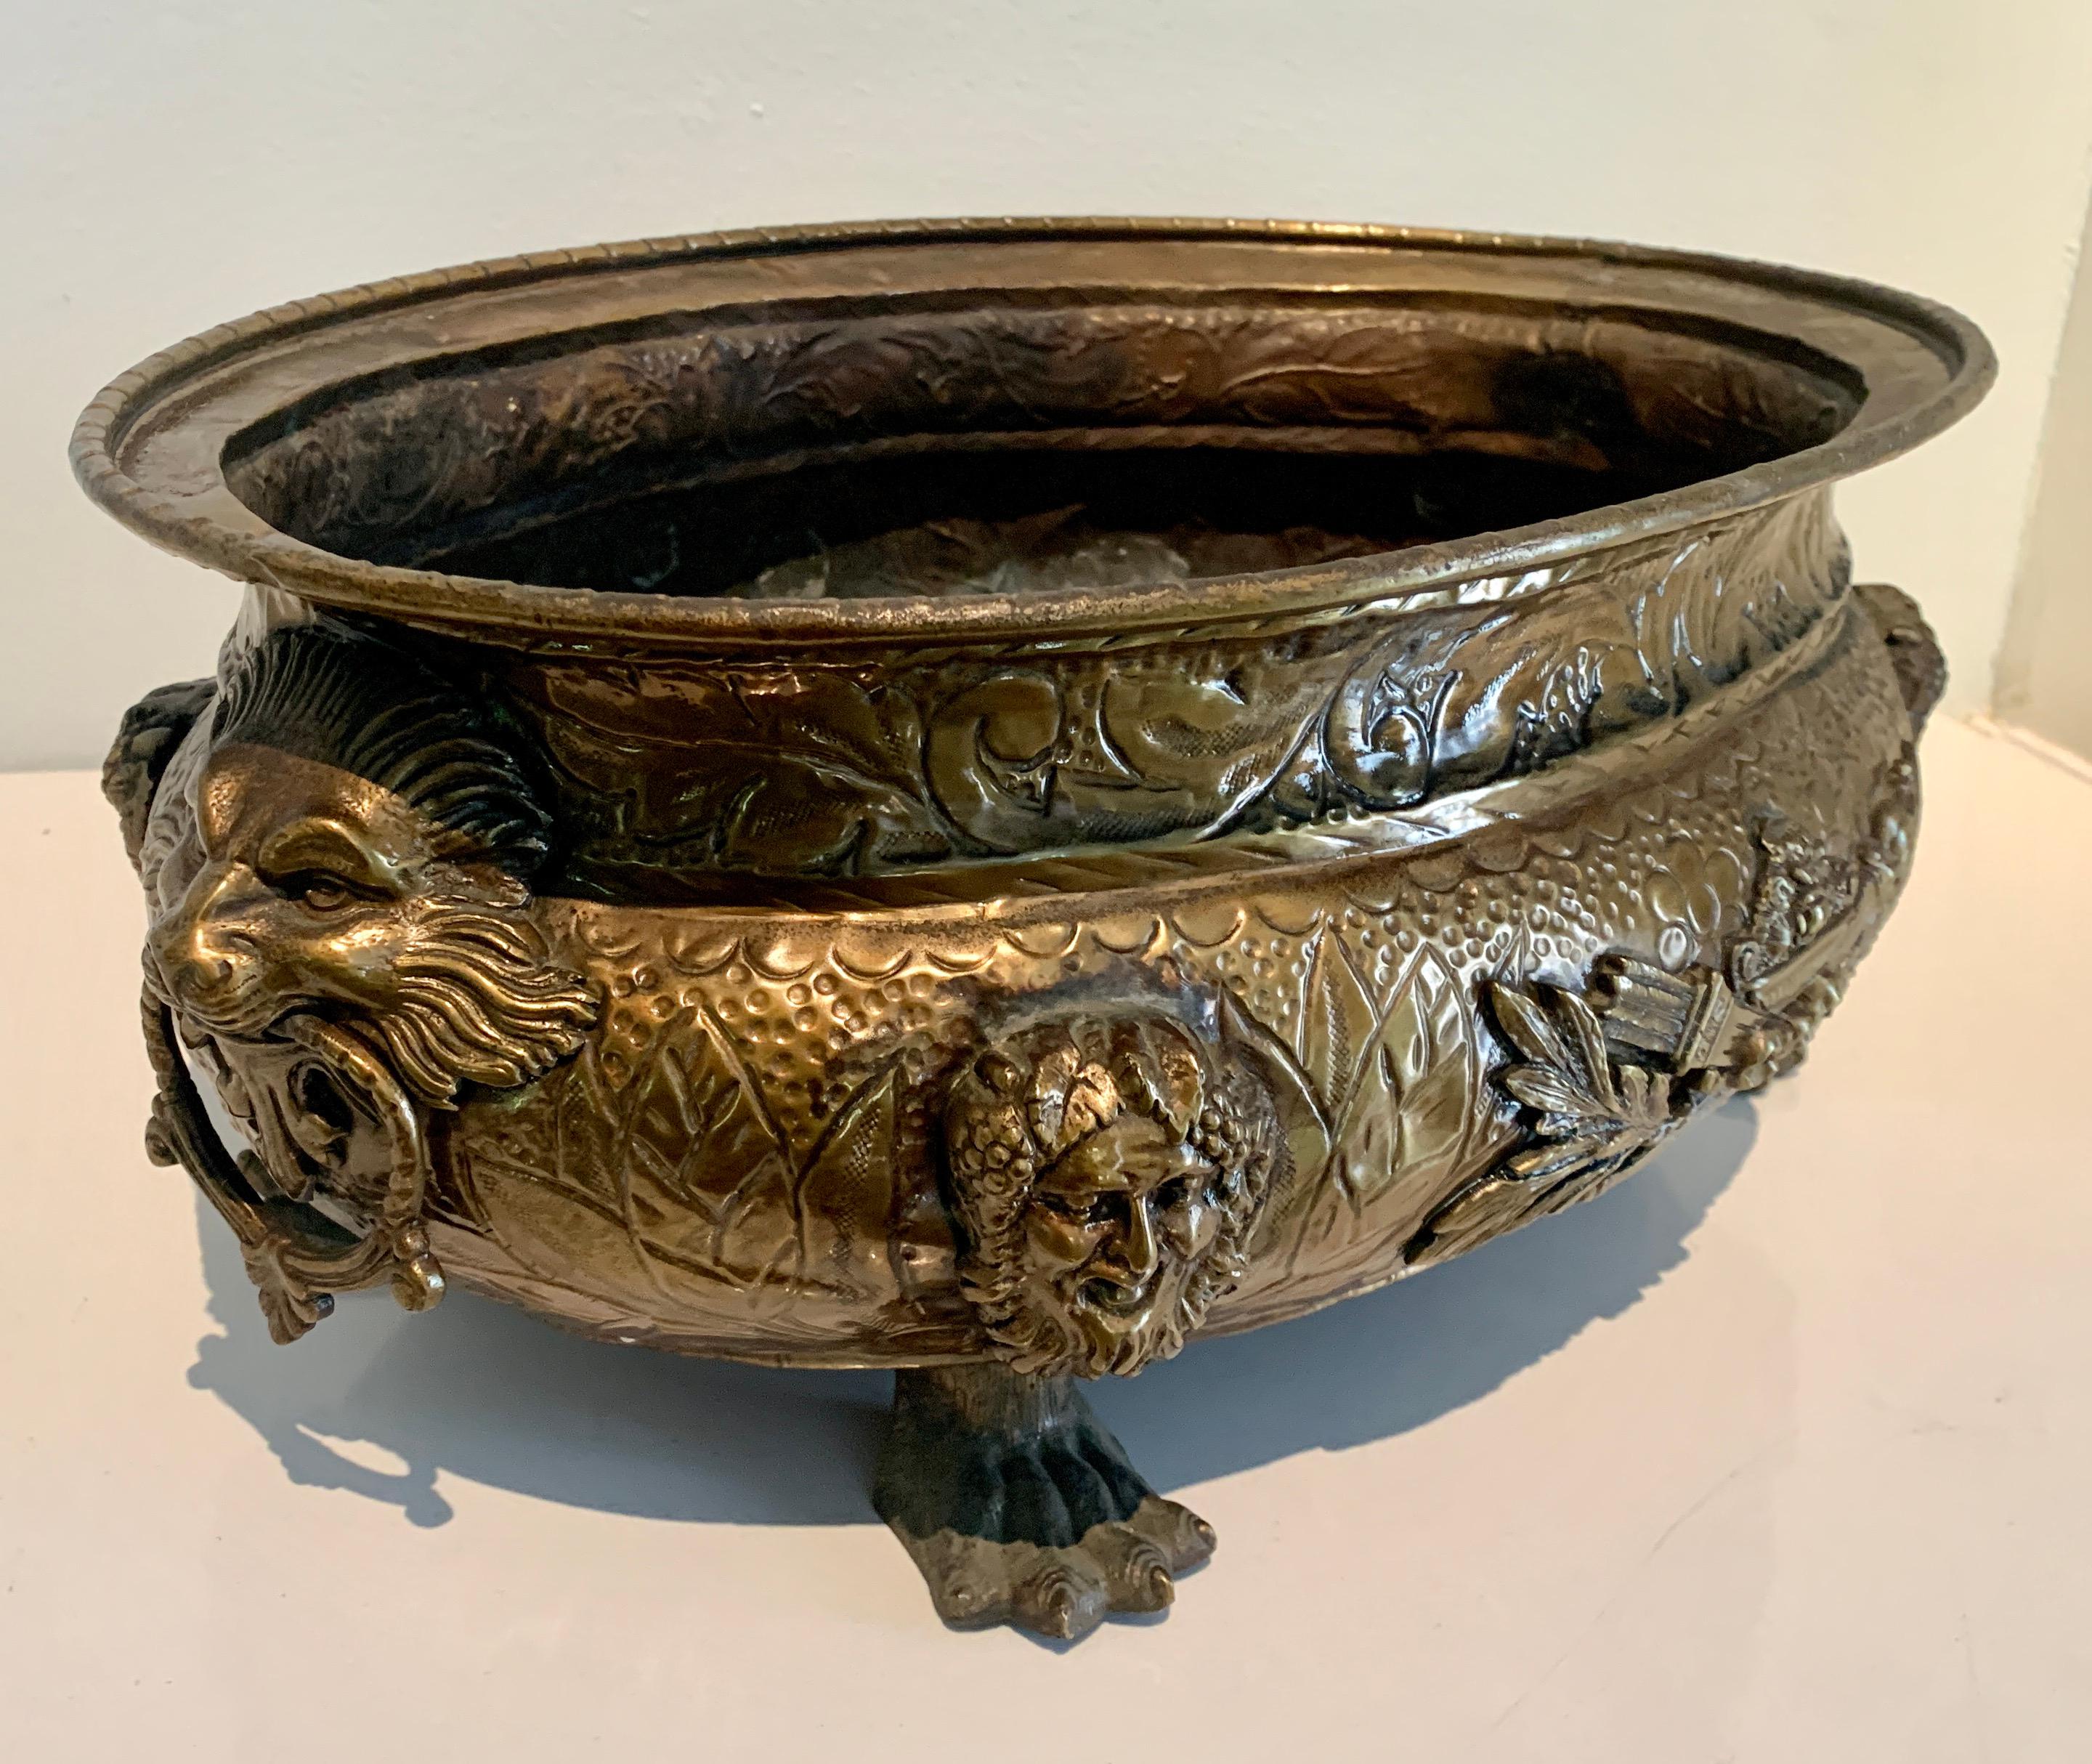 English brass footed coal bin jardiniere with lions heads, rings and paw feet details - a wonderful brass Jardiniere, the large, deep and oval design make this a compliment to any outdoor garden area, as a centerpiece or to store kindling! circa